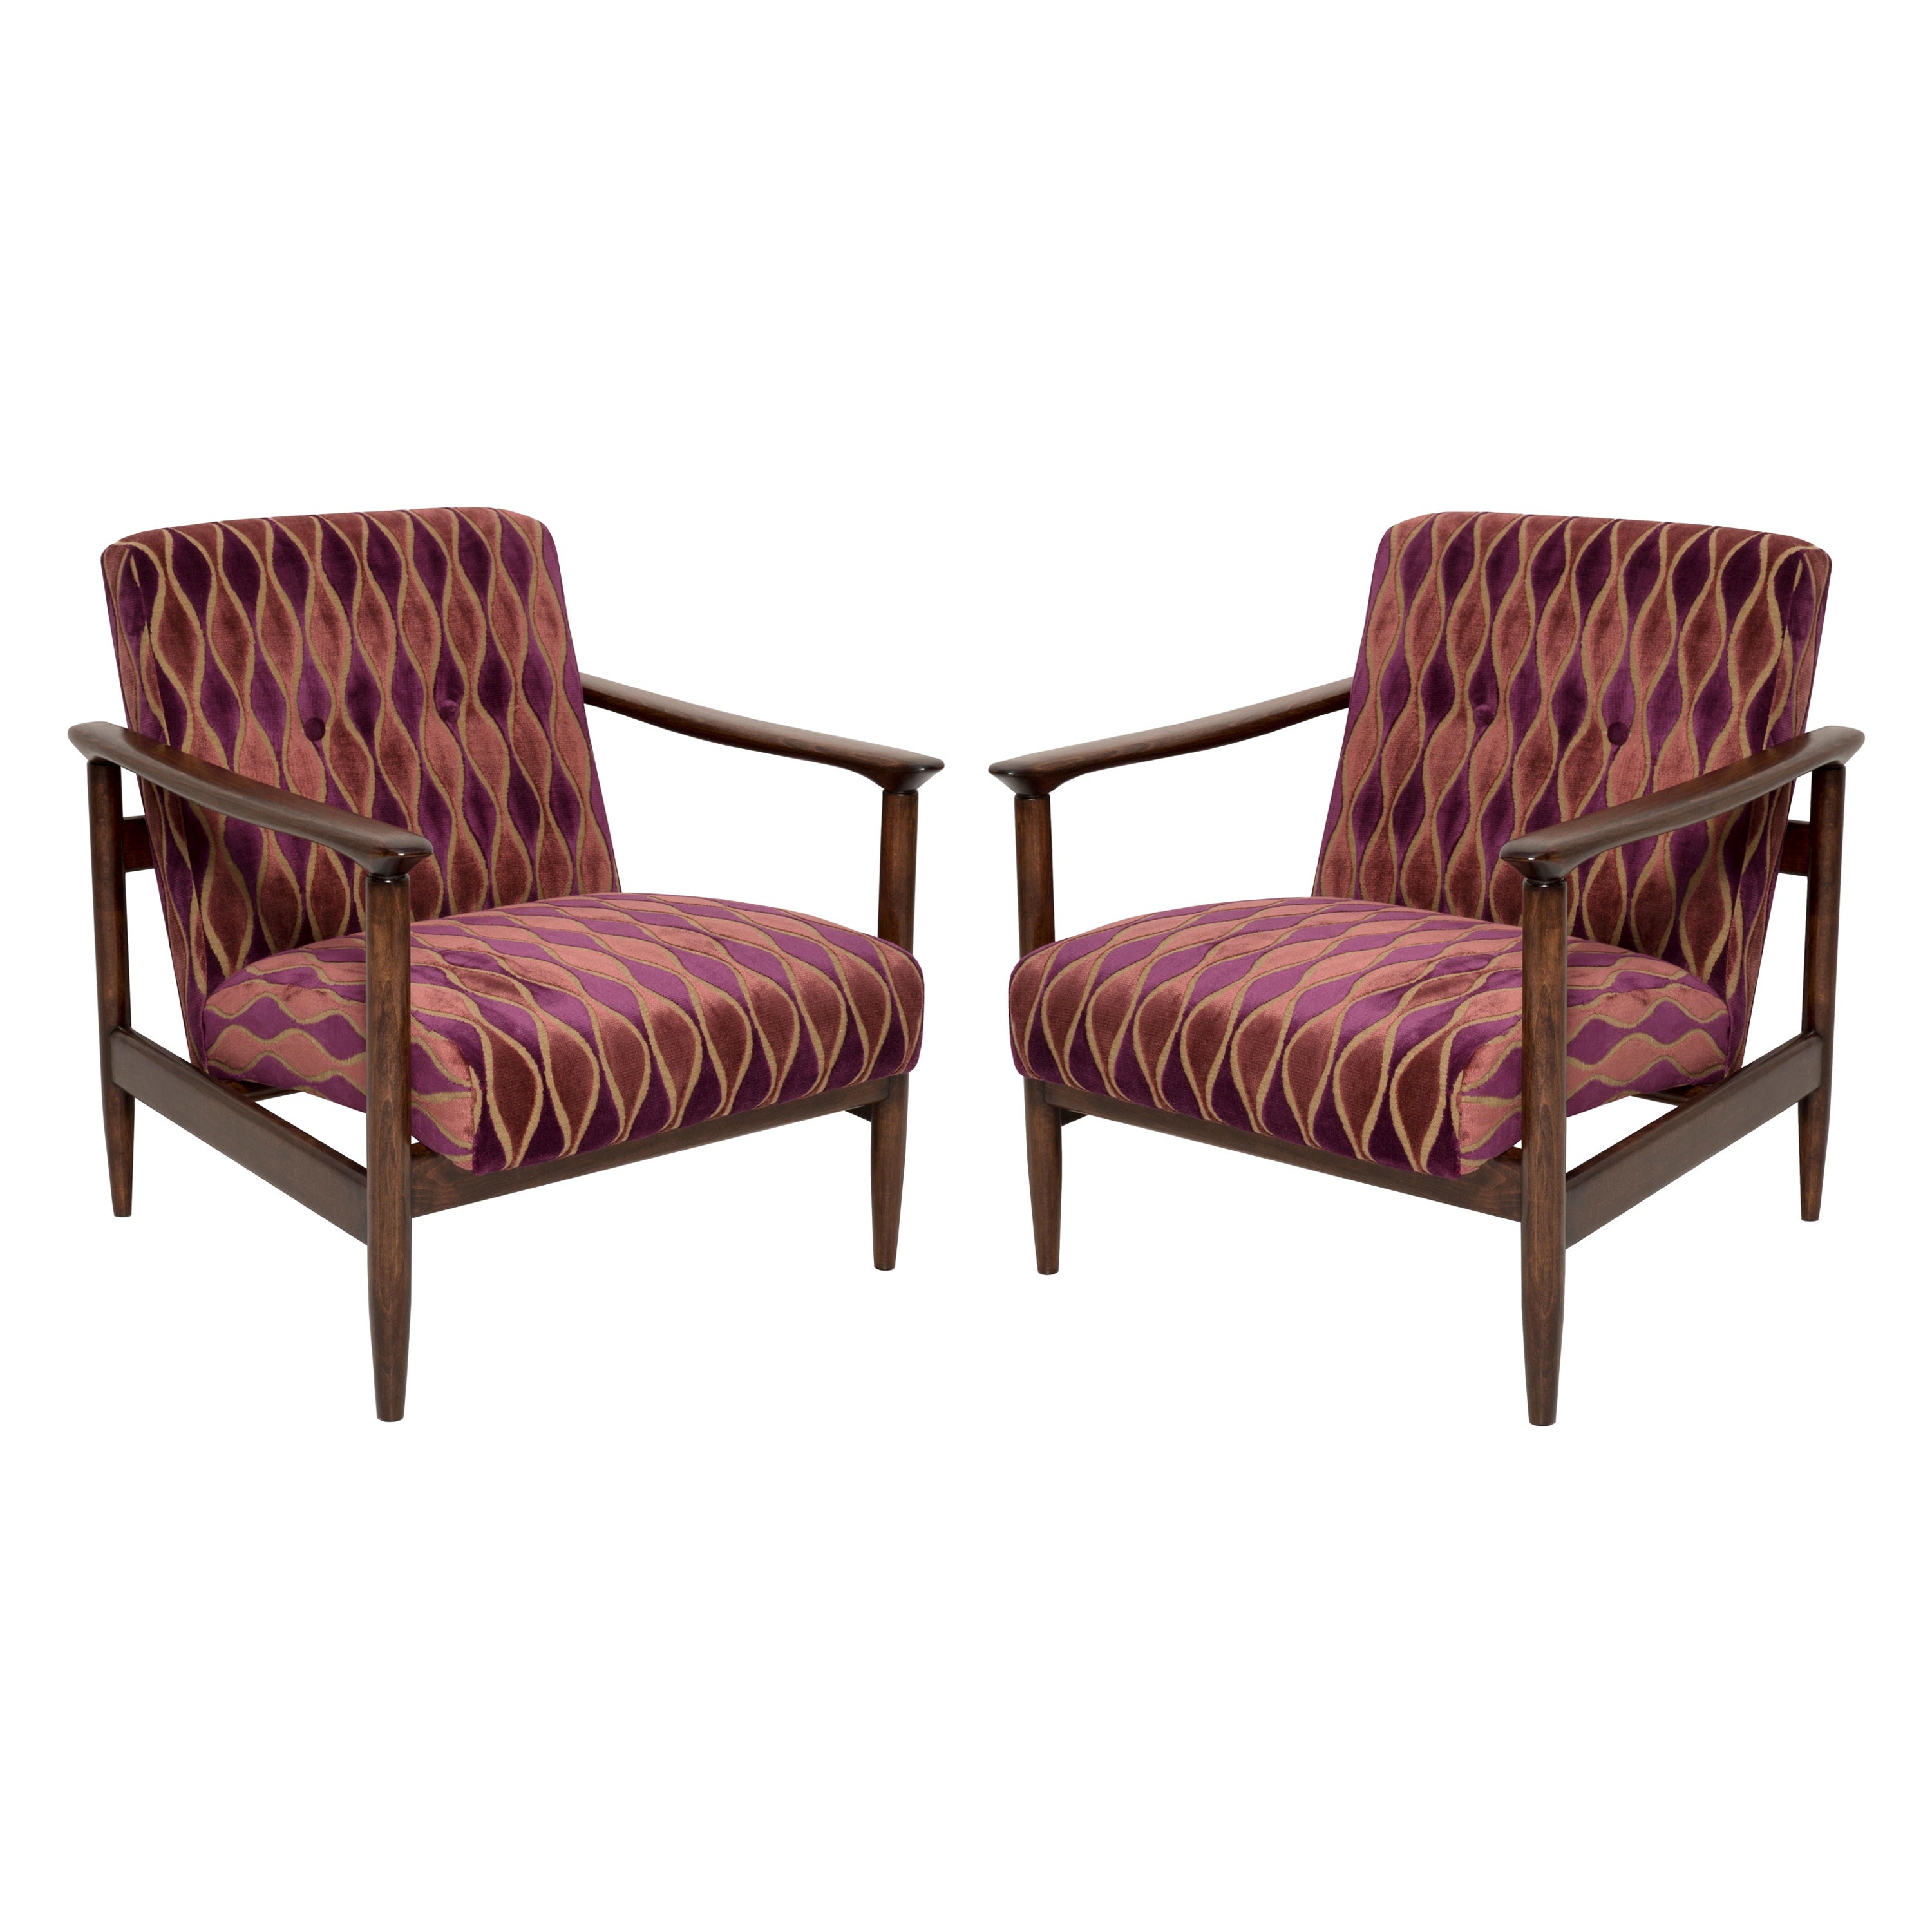 Two Mid-20th Century Pink Pattern Velvet Armchairs, Edmund Homa, Europe, 1960s